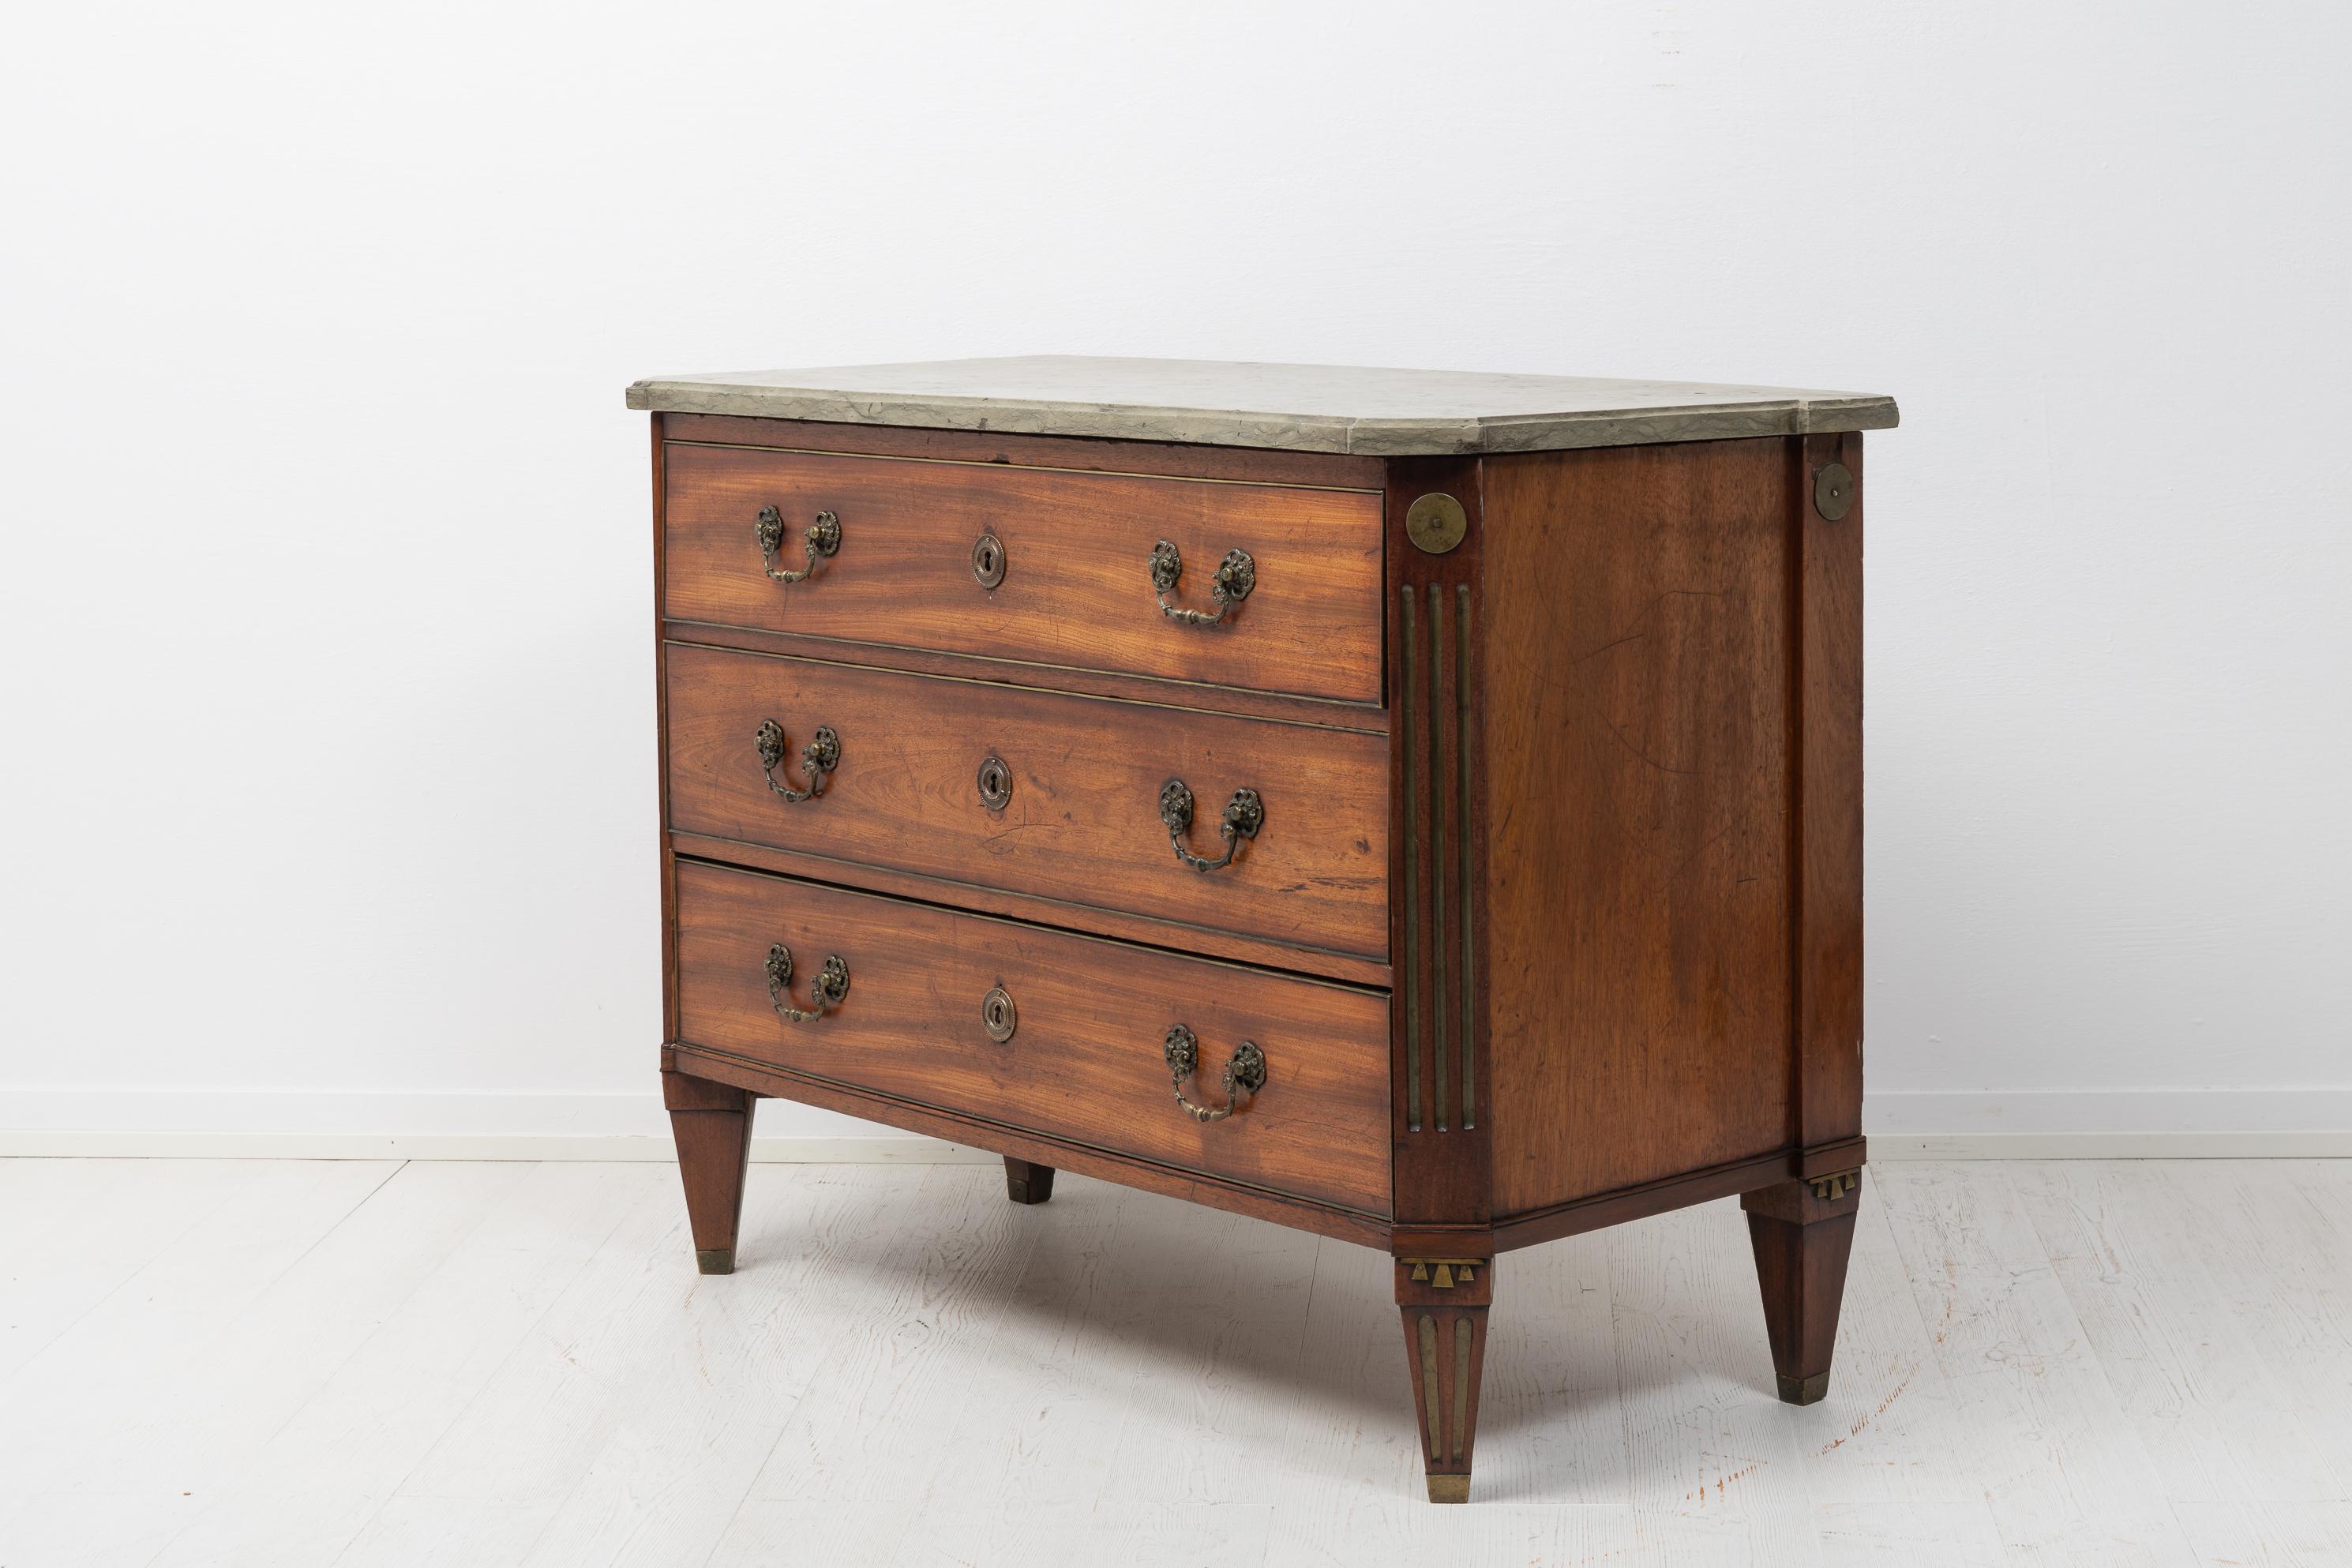 Antique Stylish Swedish Stockholm Gustavian Commode In Good Condition For Sale In Kramfors, SE